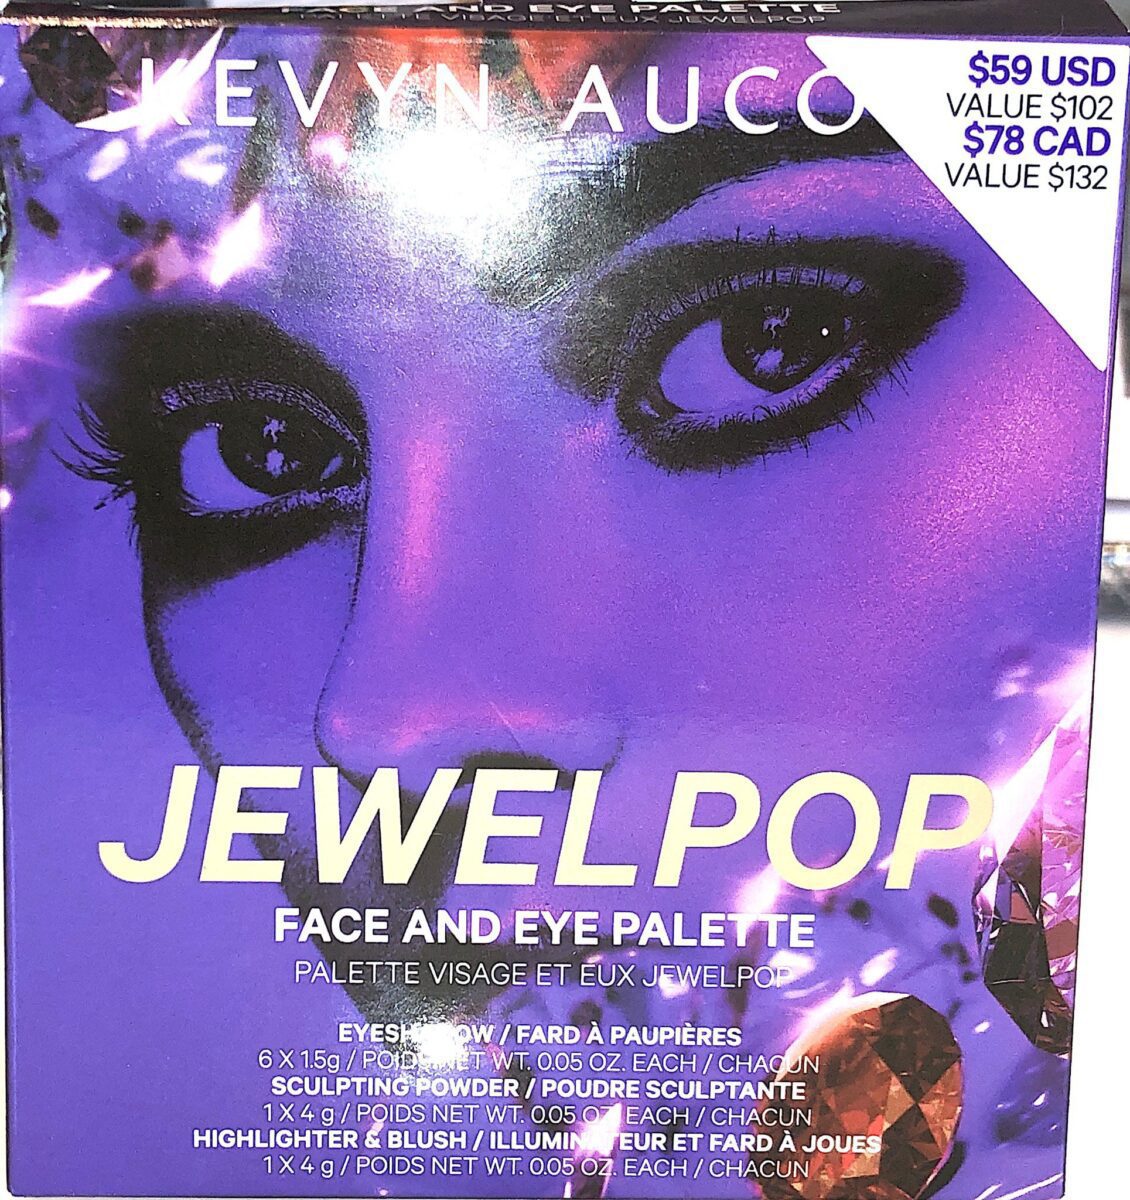 THE OUTER PACKAGING FOR THE KEVYN AUCOIN JEWEL POP PALETTE FOR FACE AND EYES